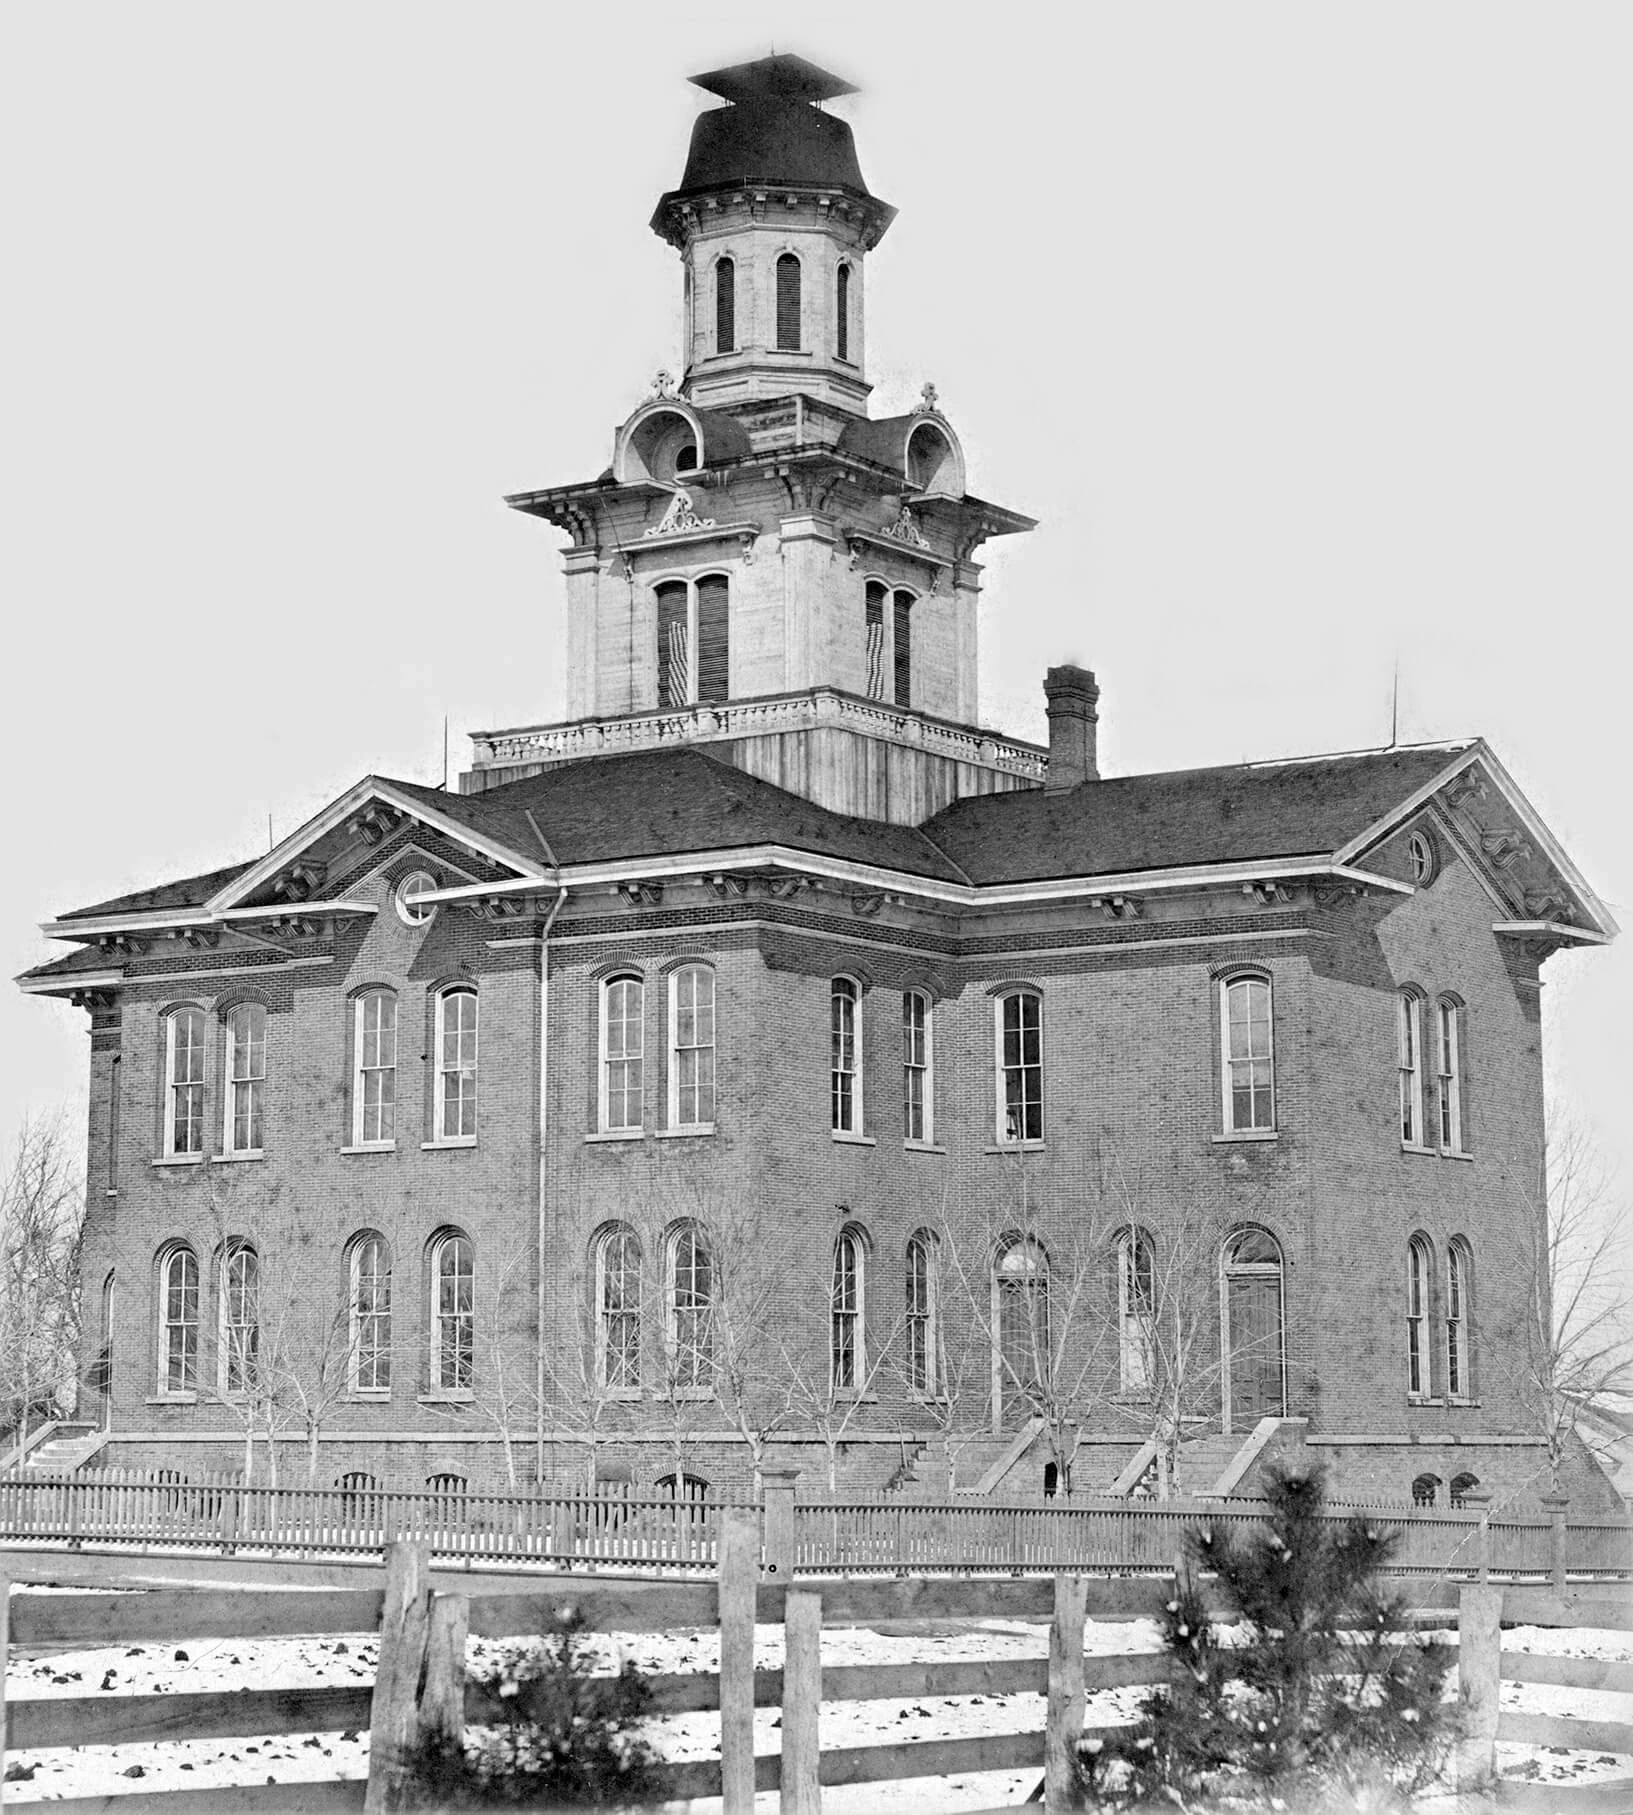 Three story brick school building, with large cupola